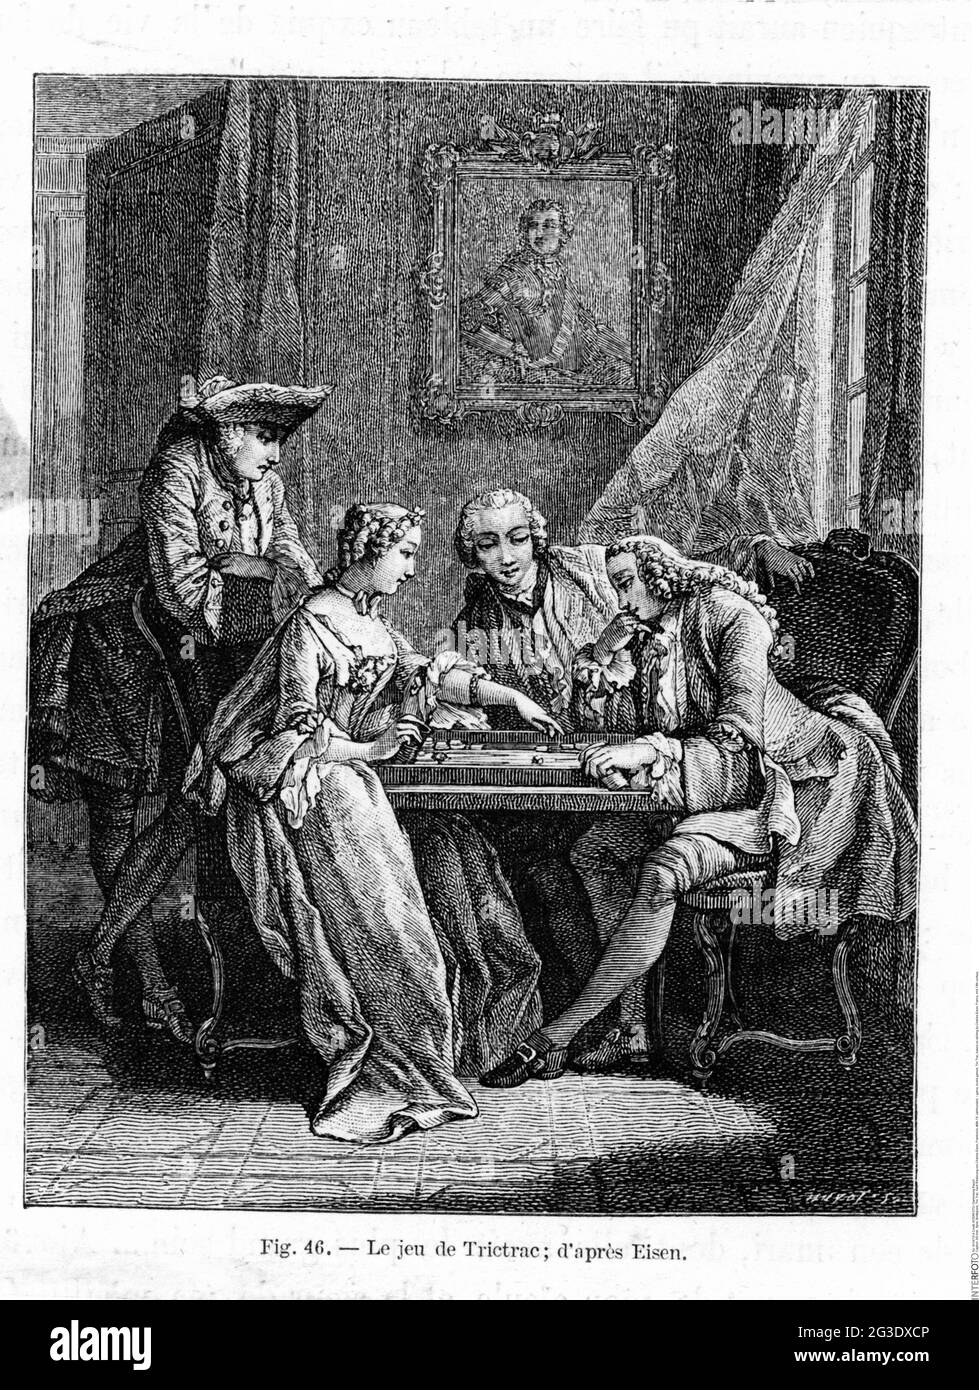 game, board games, Tric Trac, based on etching by Charles Eisen, France, mid 18th century, ARTIST'S COPYRIGHT HAS NOT TO BE CLEARED Stock Photo